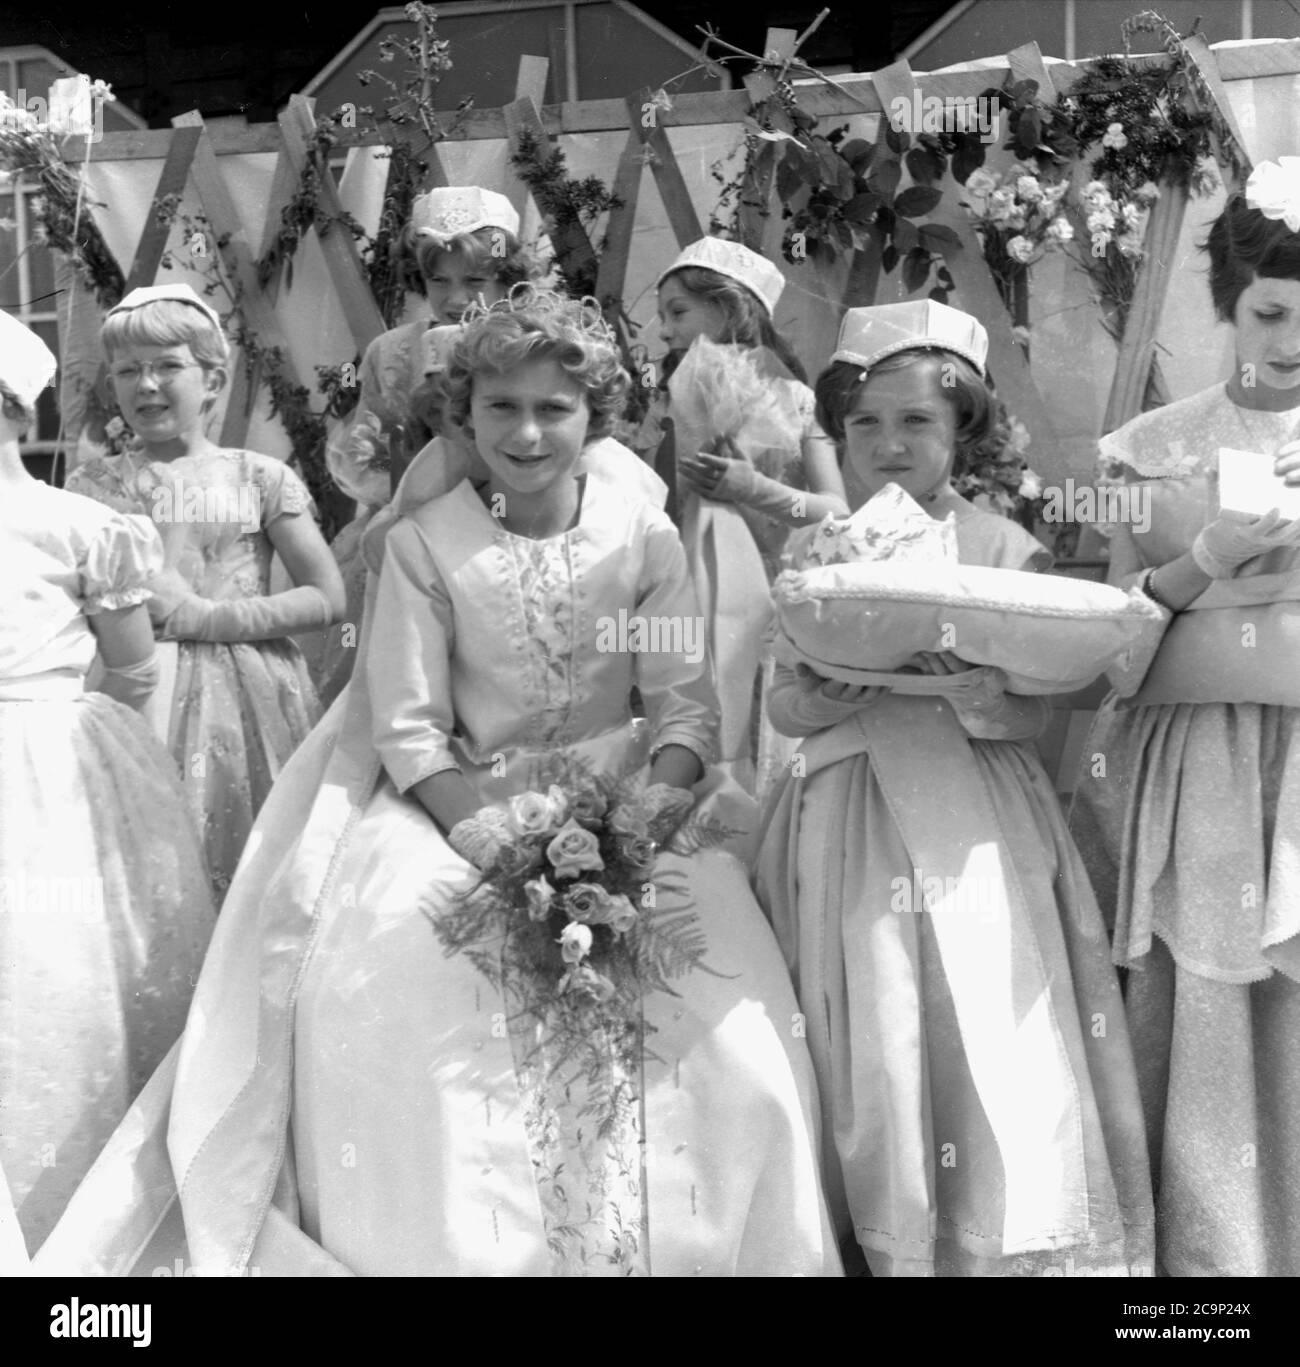 1950s, historical, on a platform outside a wooden sports pavillion at Farnworth, Lancashire, young girls dressed in gowns gather together for the Rose Queen ceremony. The 'Rose Queen' would lead the traditional procession or parade known as a 'Walking Day', celebrations which were common in the North West of England, UK in this era. An annual event, some date back to the 1830s where they were church parades connected to the childrens Sunday Schools and many are still held today. Stock Photo